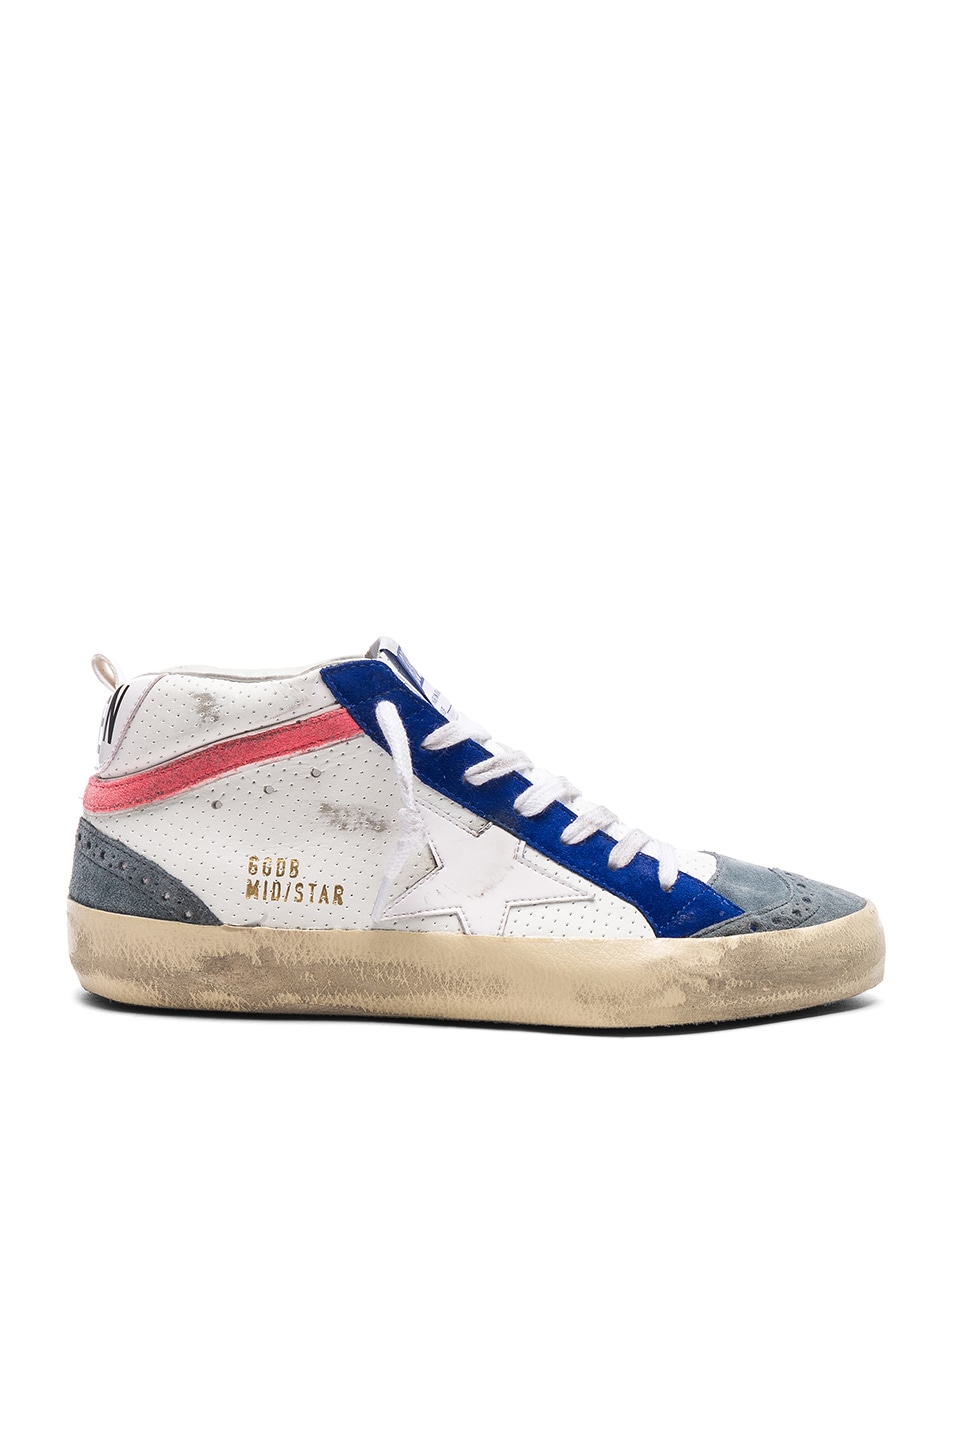 Image 1 of Golden Goose Mid Star Sneakers in White & White